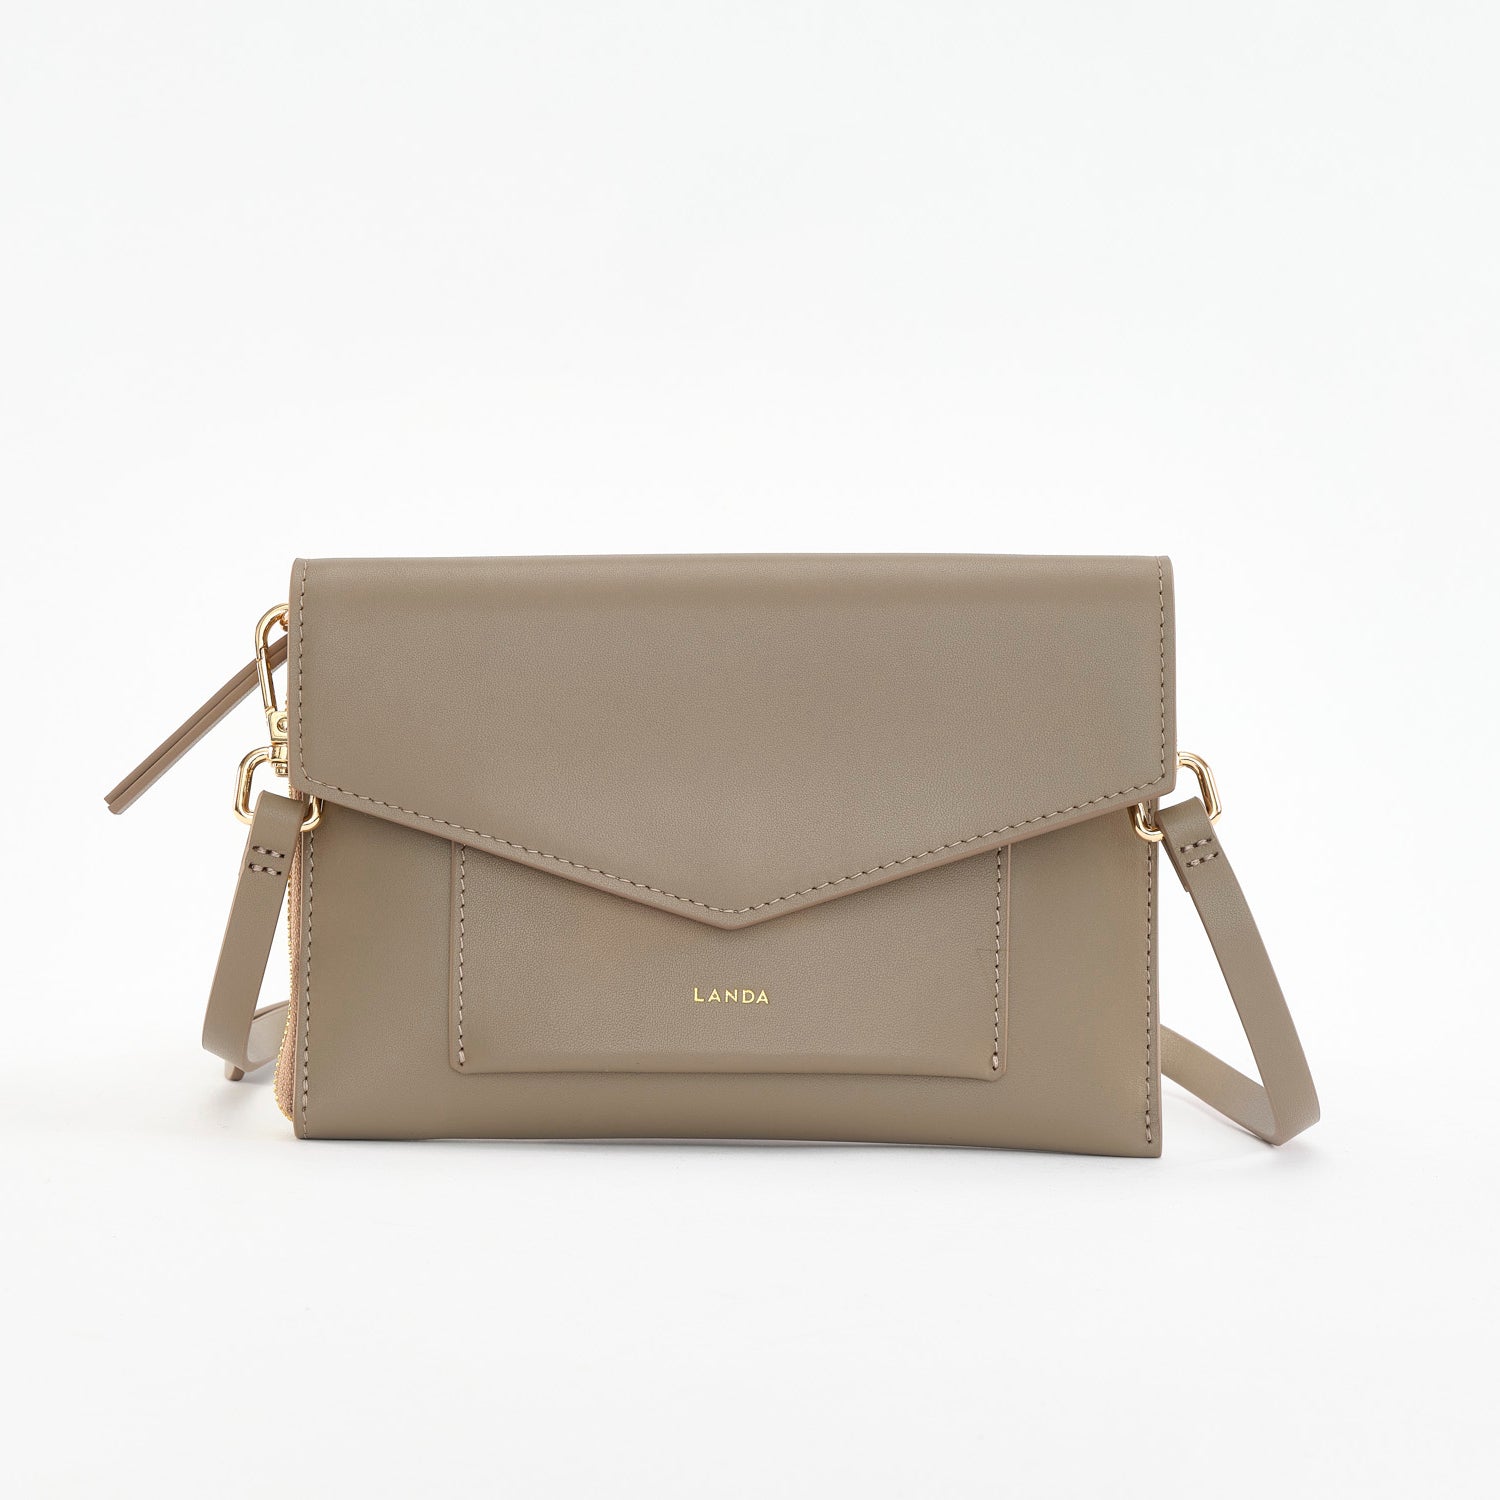 ALISO Structured Phone Bag Taupe